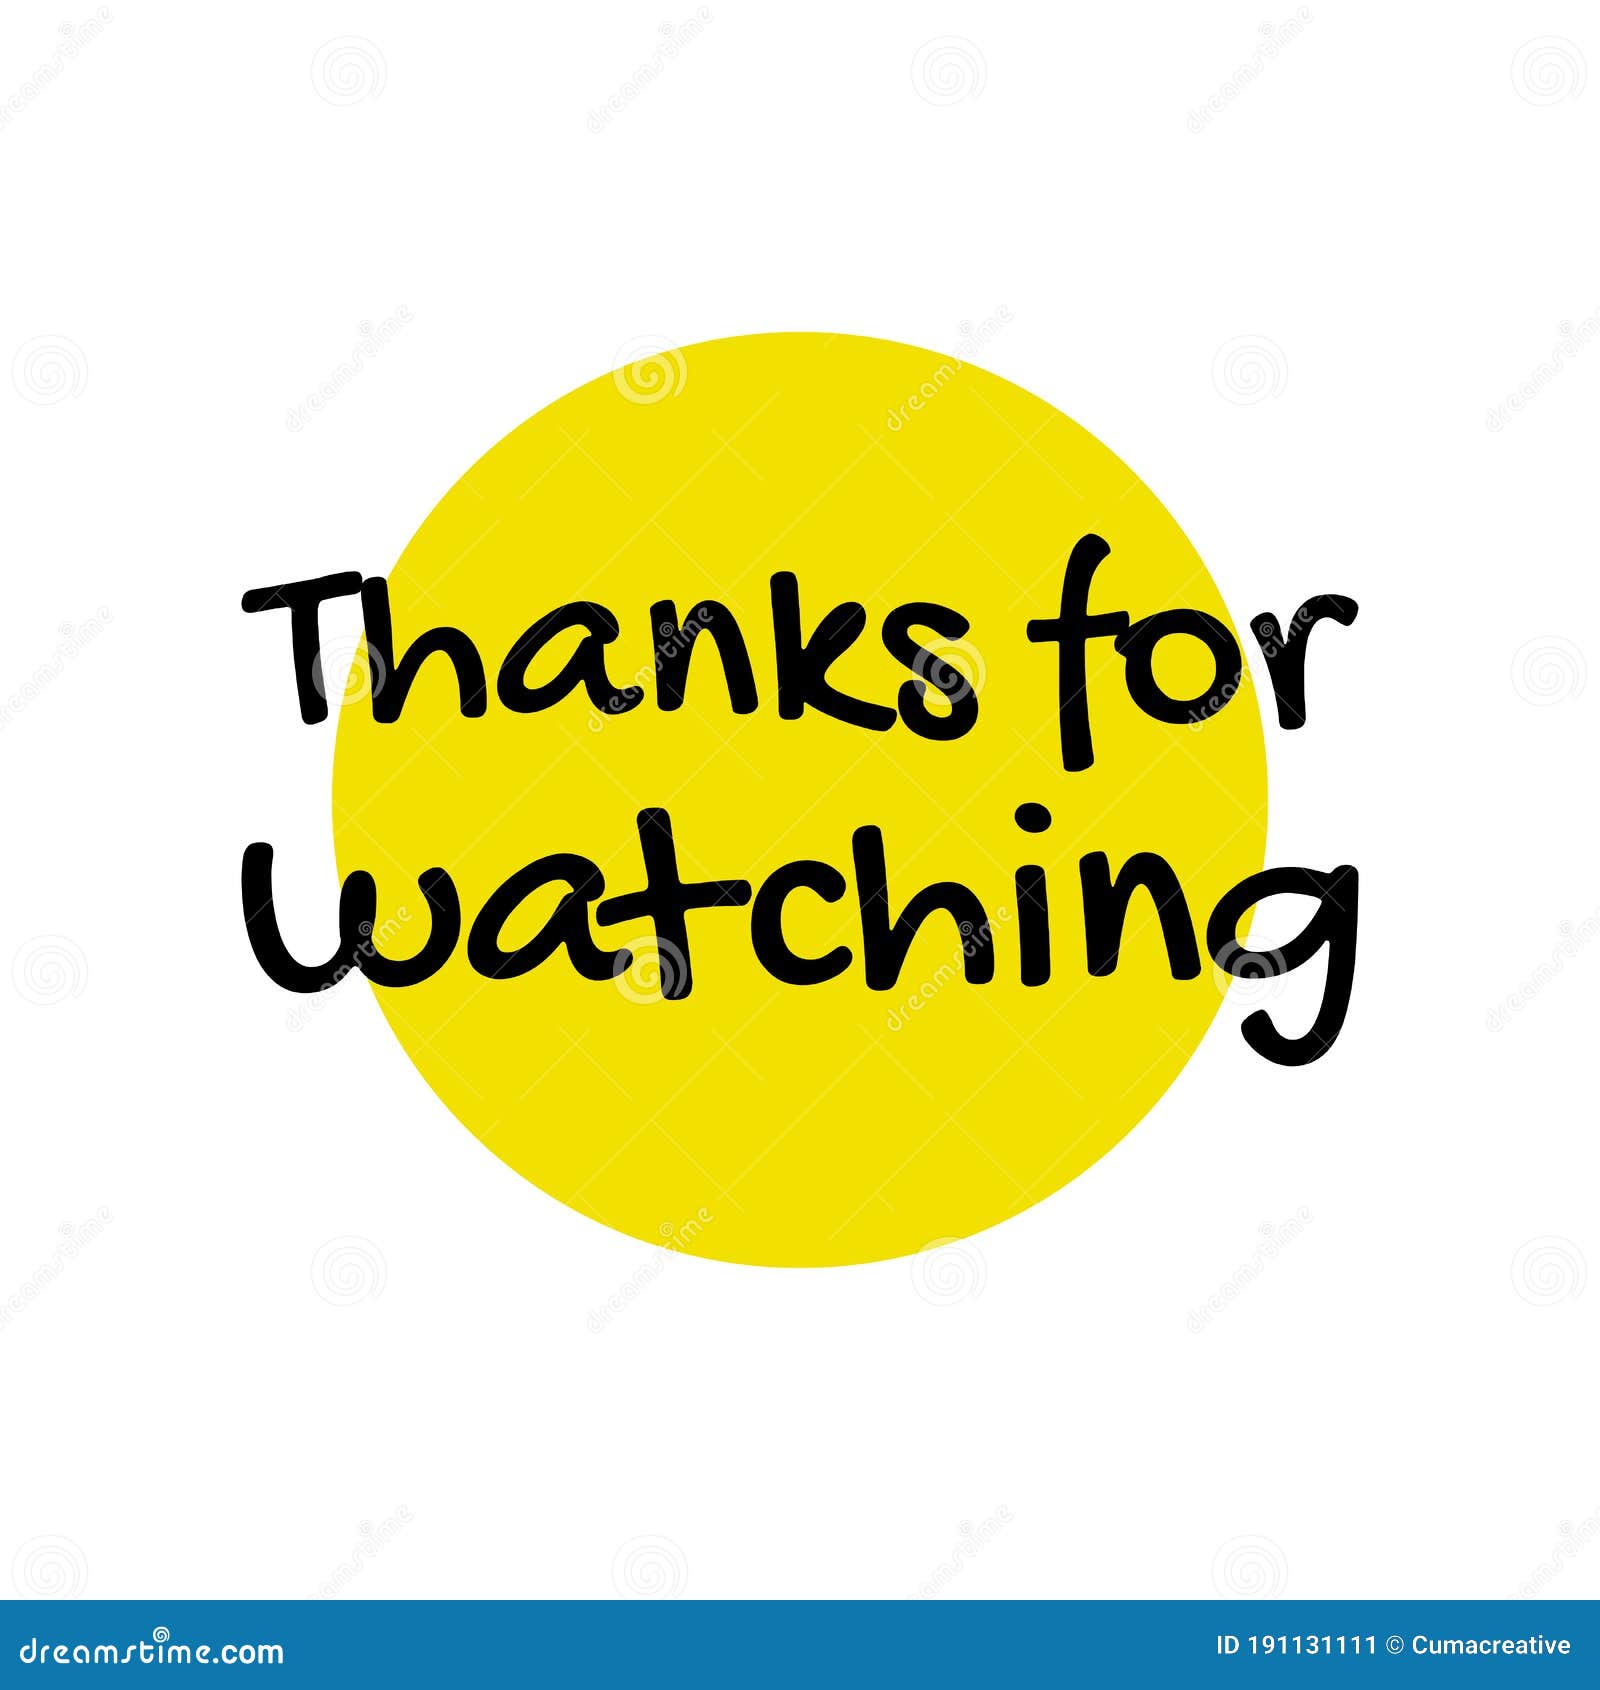 Thanks for Watching Cover with Yellow Circle Isolated on White ...